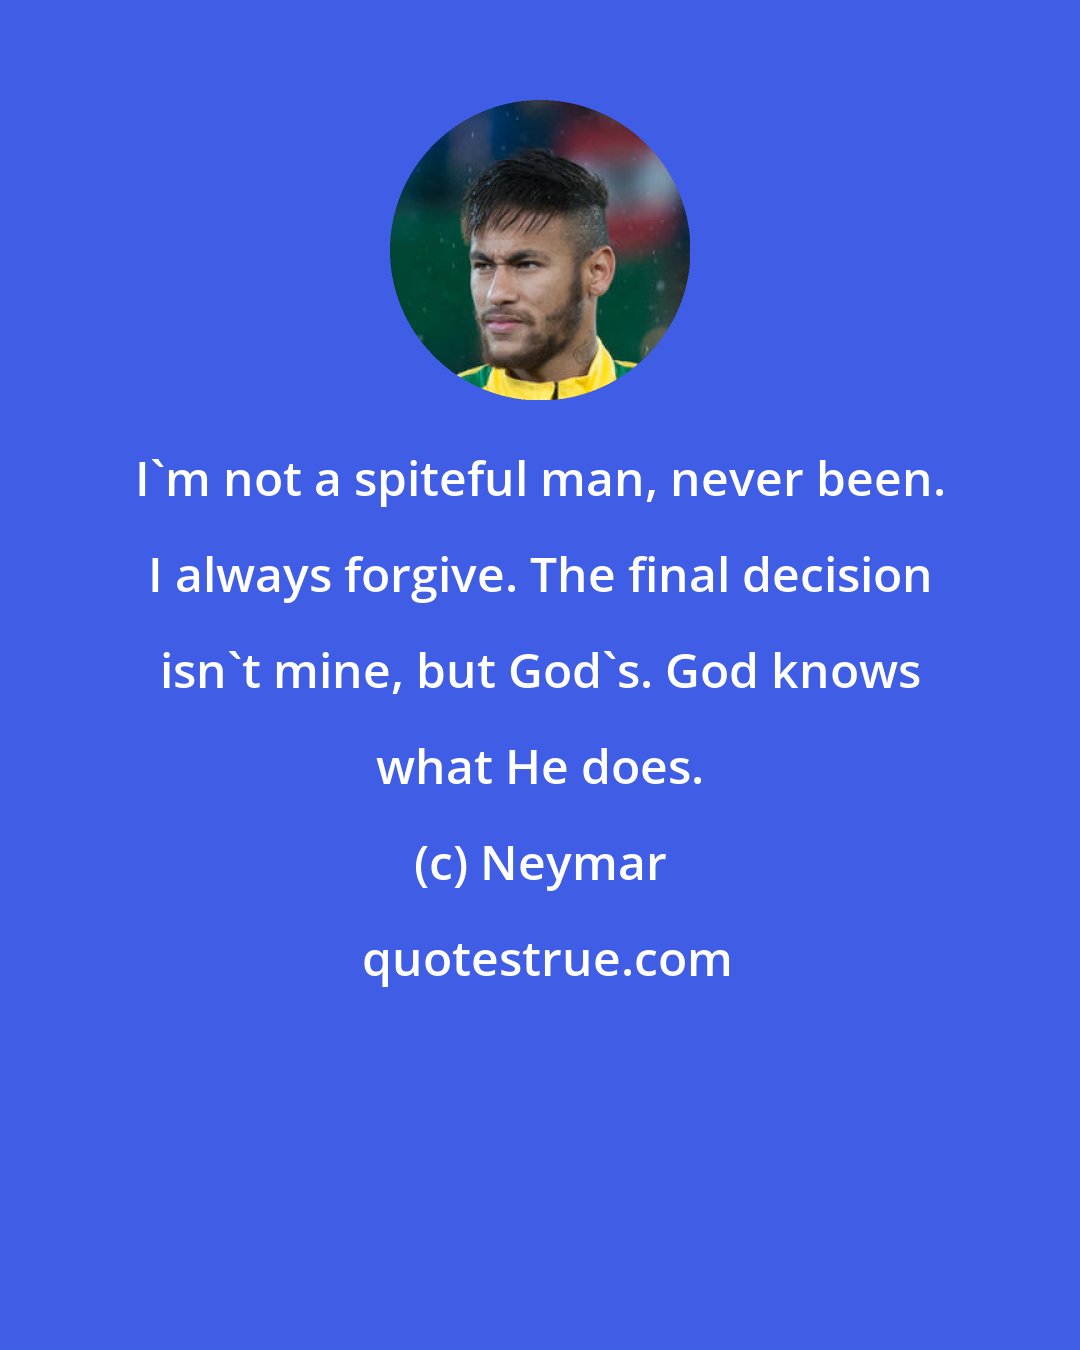 Neymar: I'm not a spiteful man, never been. I always forgive. The final decision isn't mine, but God's. God knows what He does.